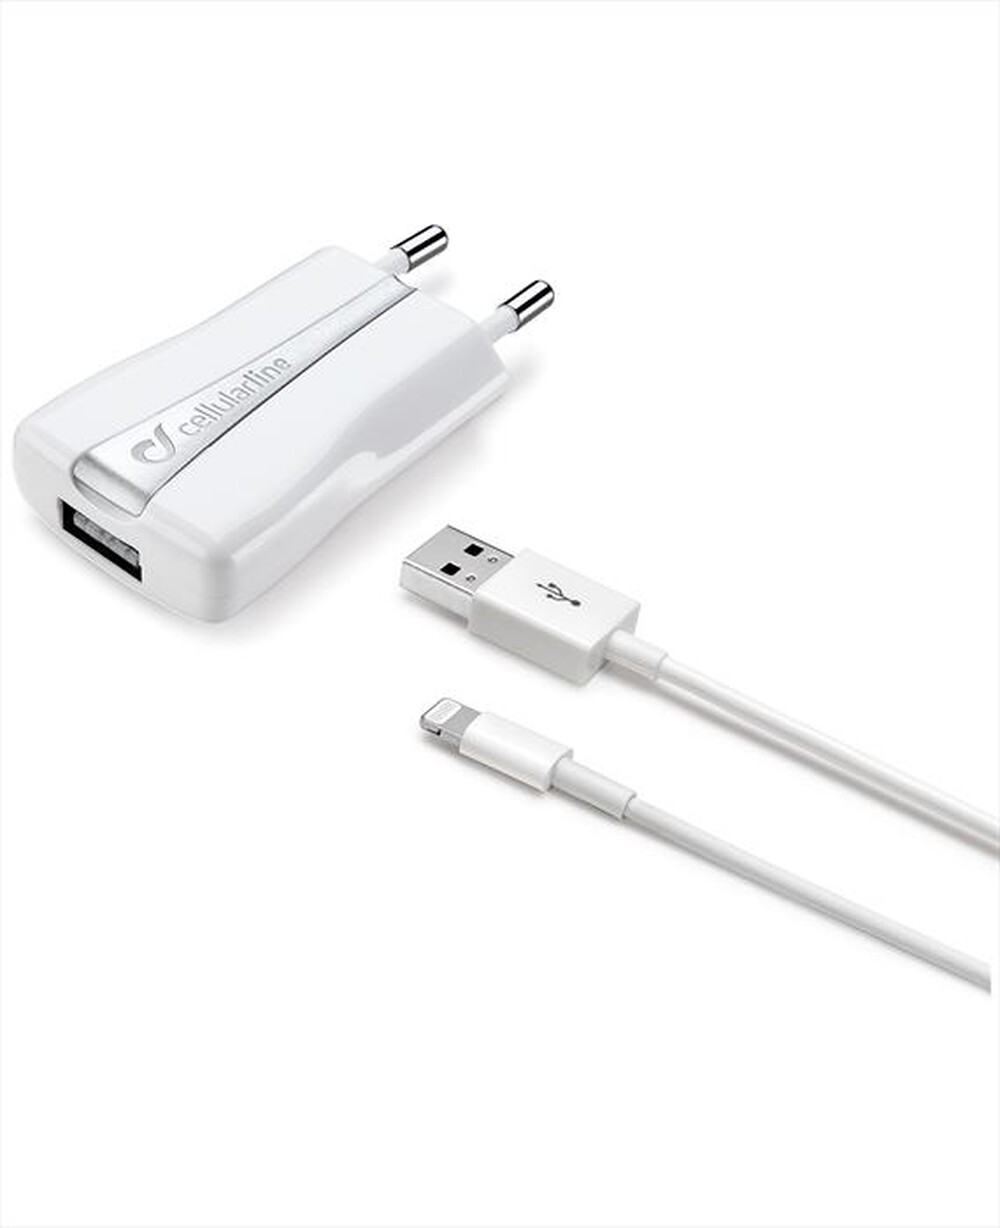 "CELLULARLINE - TRAVEL CHARGER KIT for iPhone 5S/5C/ ACHUSBMFIIPH - Bianco"